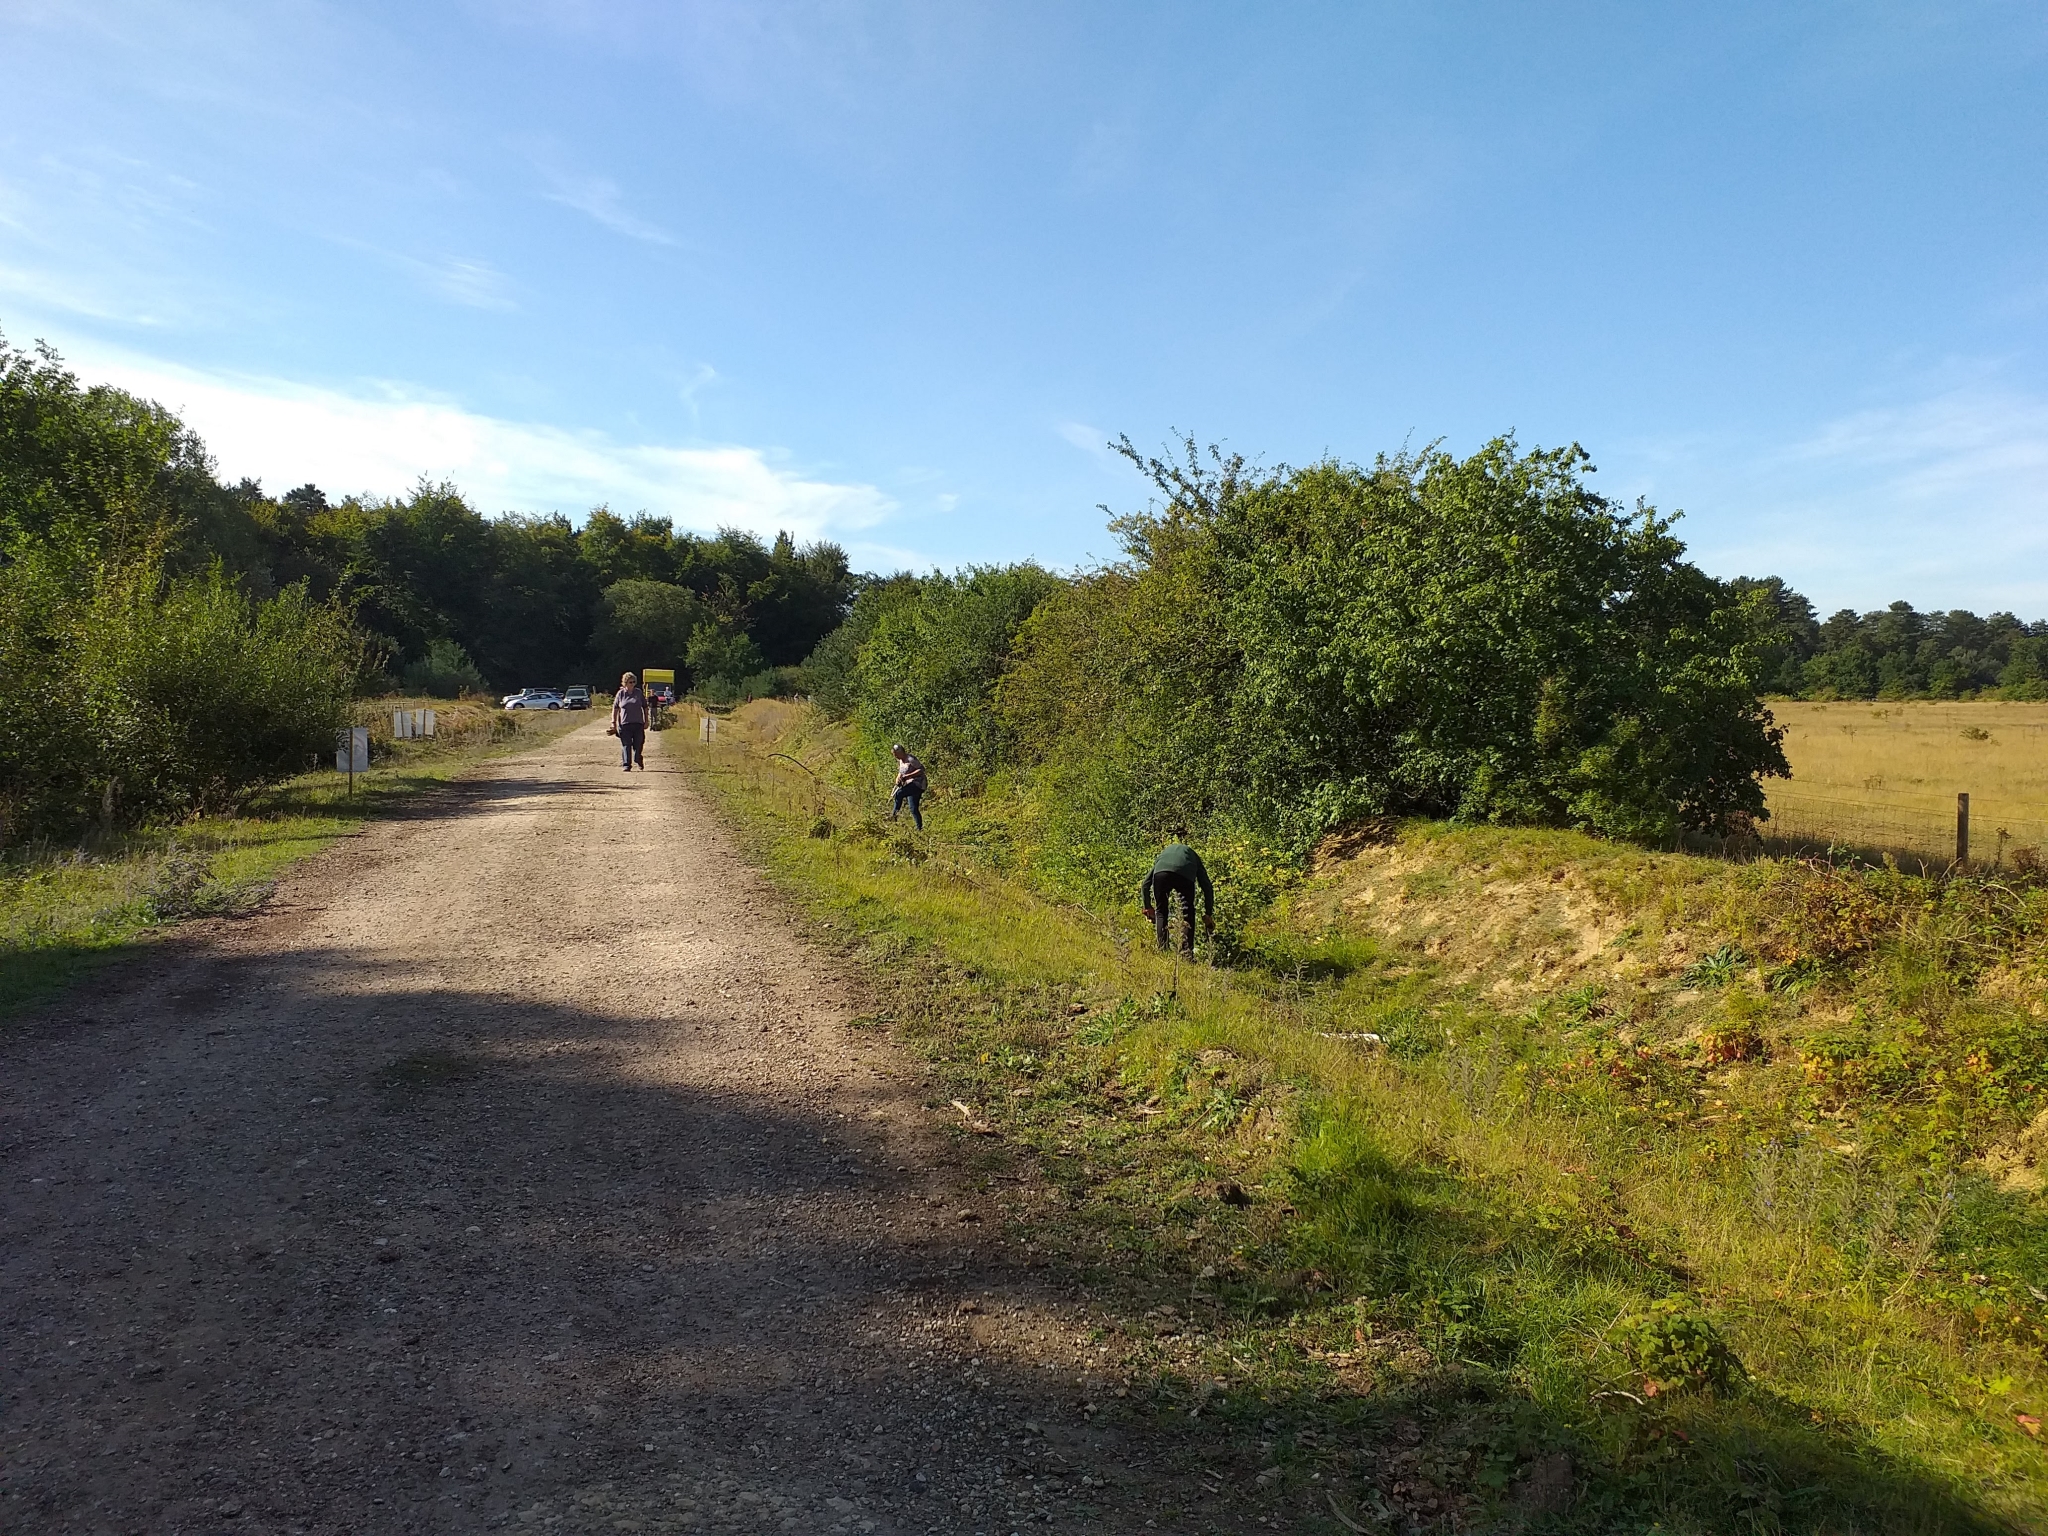 A photo from the FoTF Conservation Event - September 2019 - Scrub Clearance at Cranwich Camp : Volunteers work to clear the scrub alongside unmade road